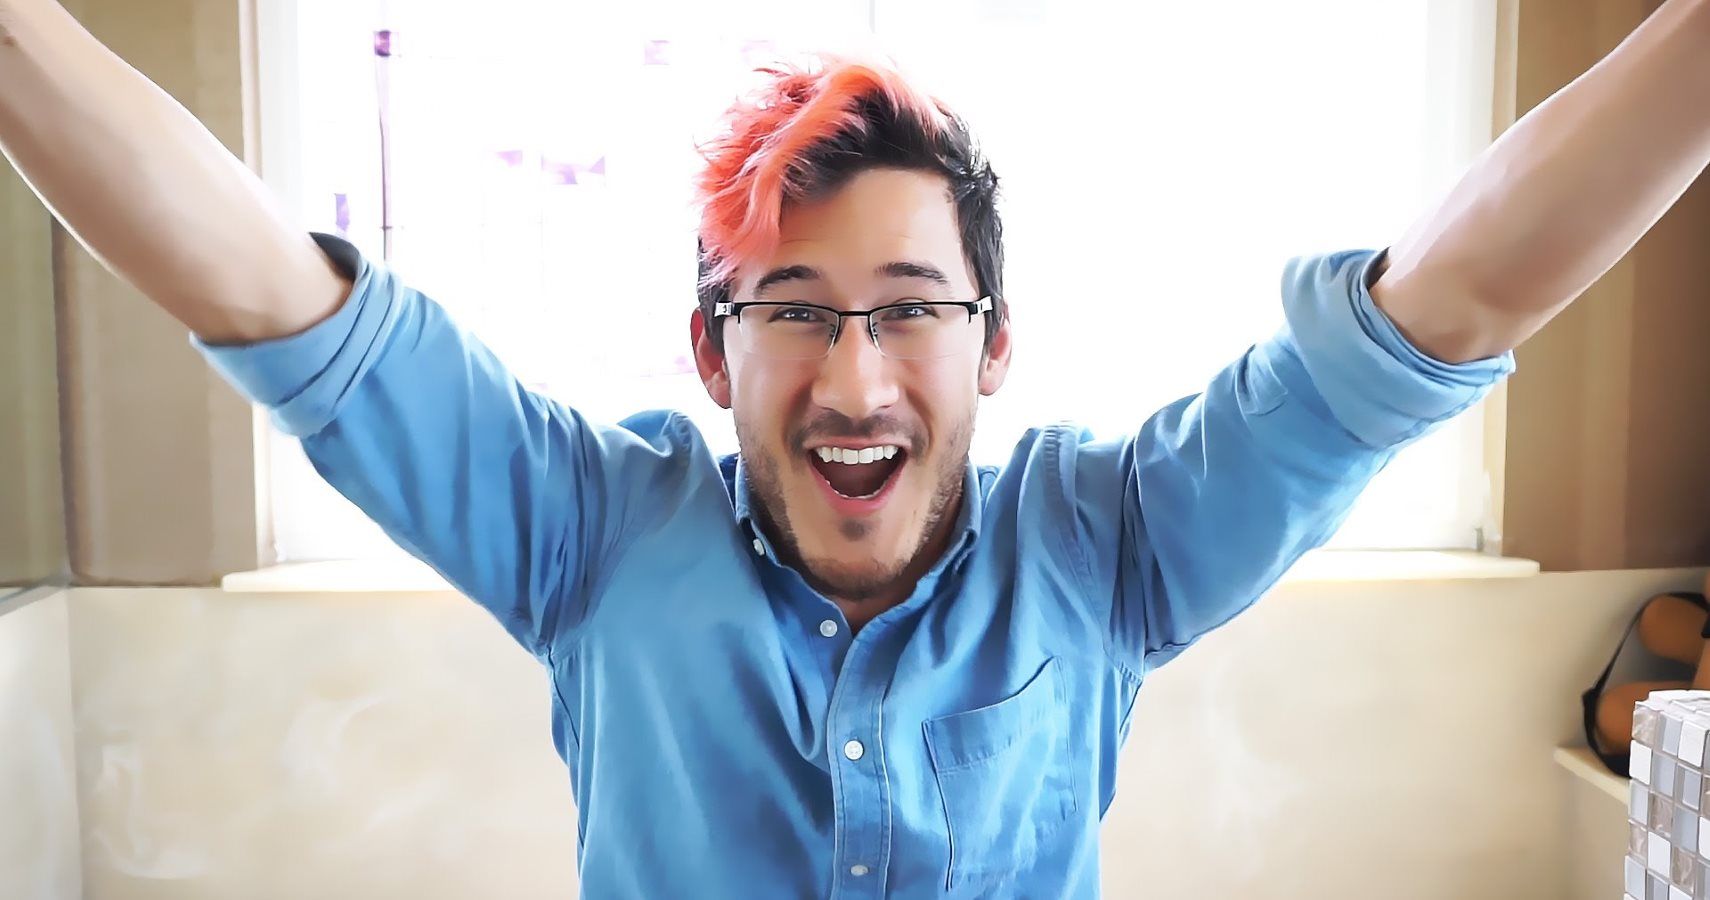 Markiplier Is Worth About $24 Million, Says "It's More Than I Deserve"